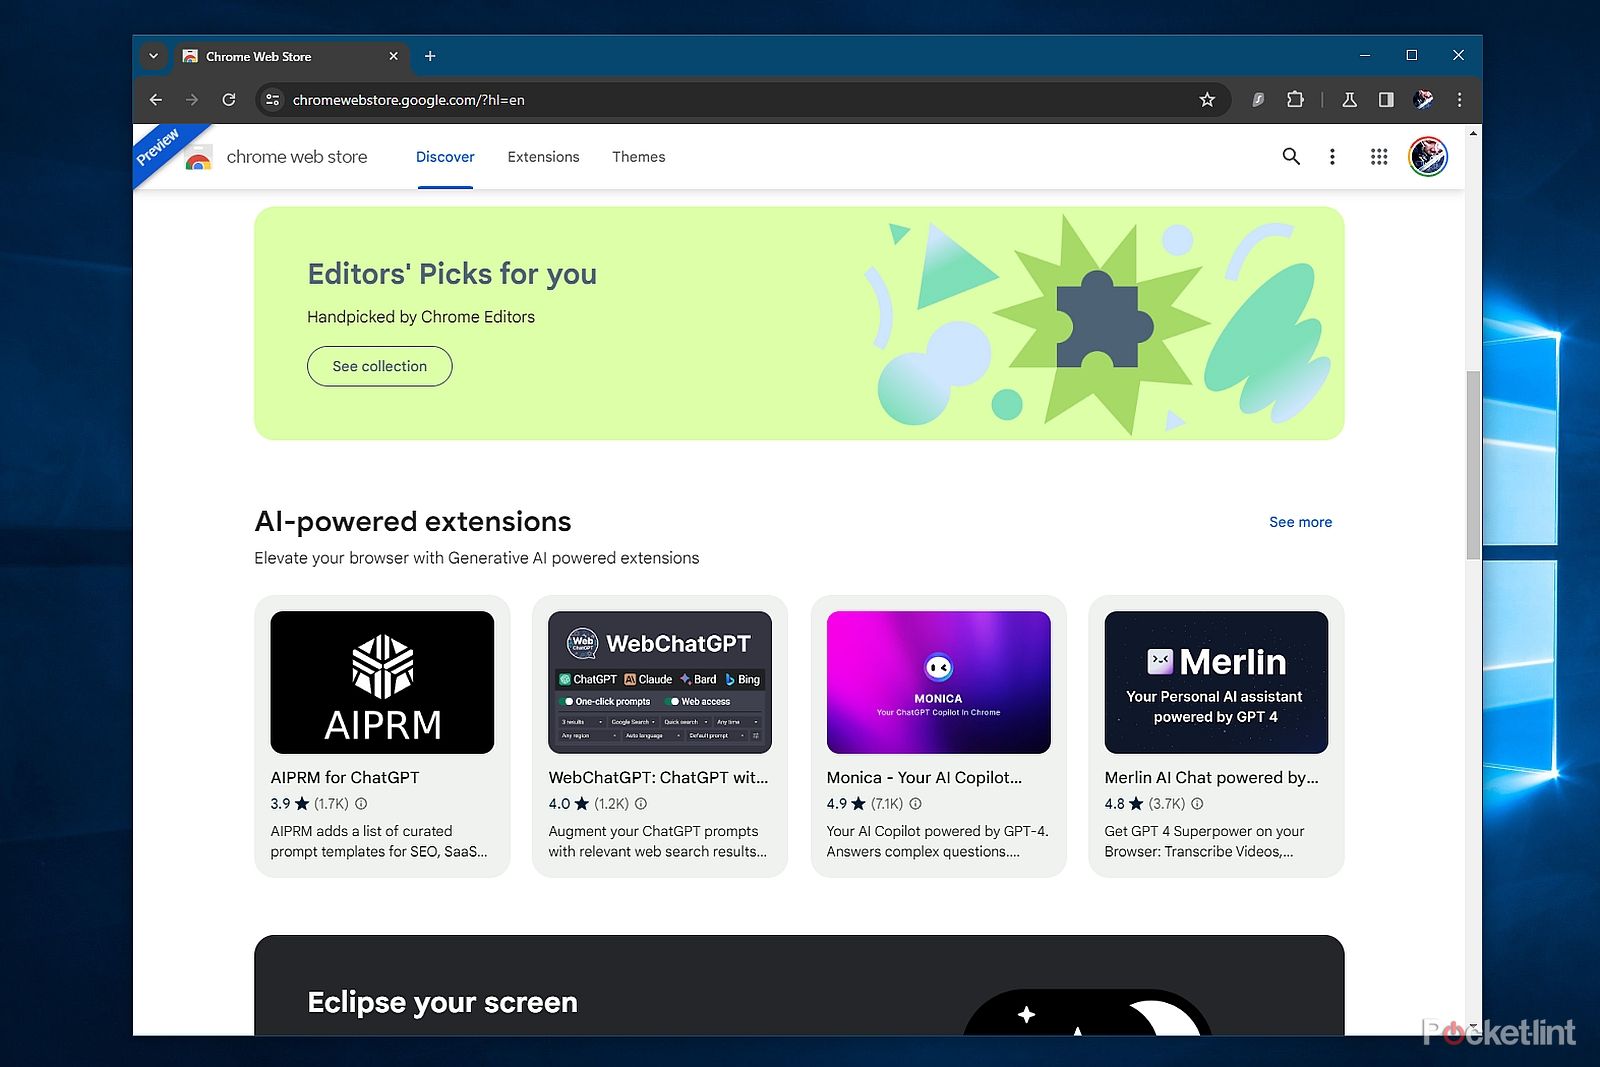 The revamped new Chrome Web Store